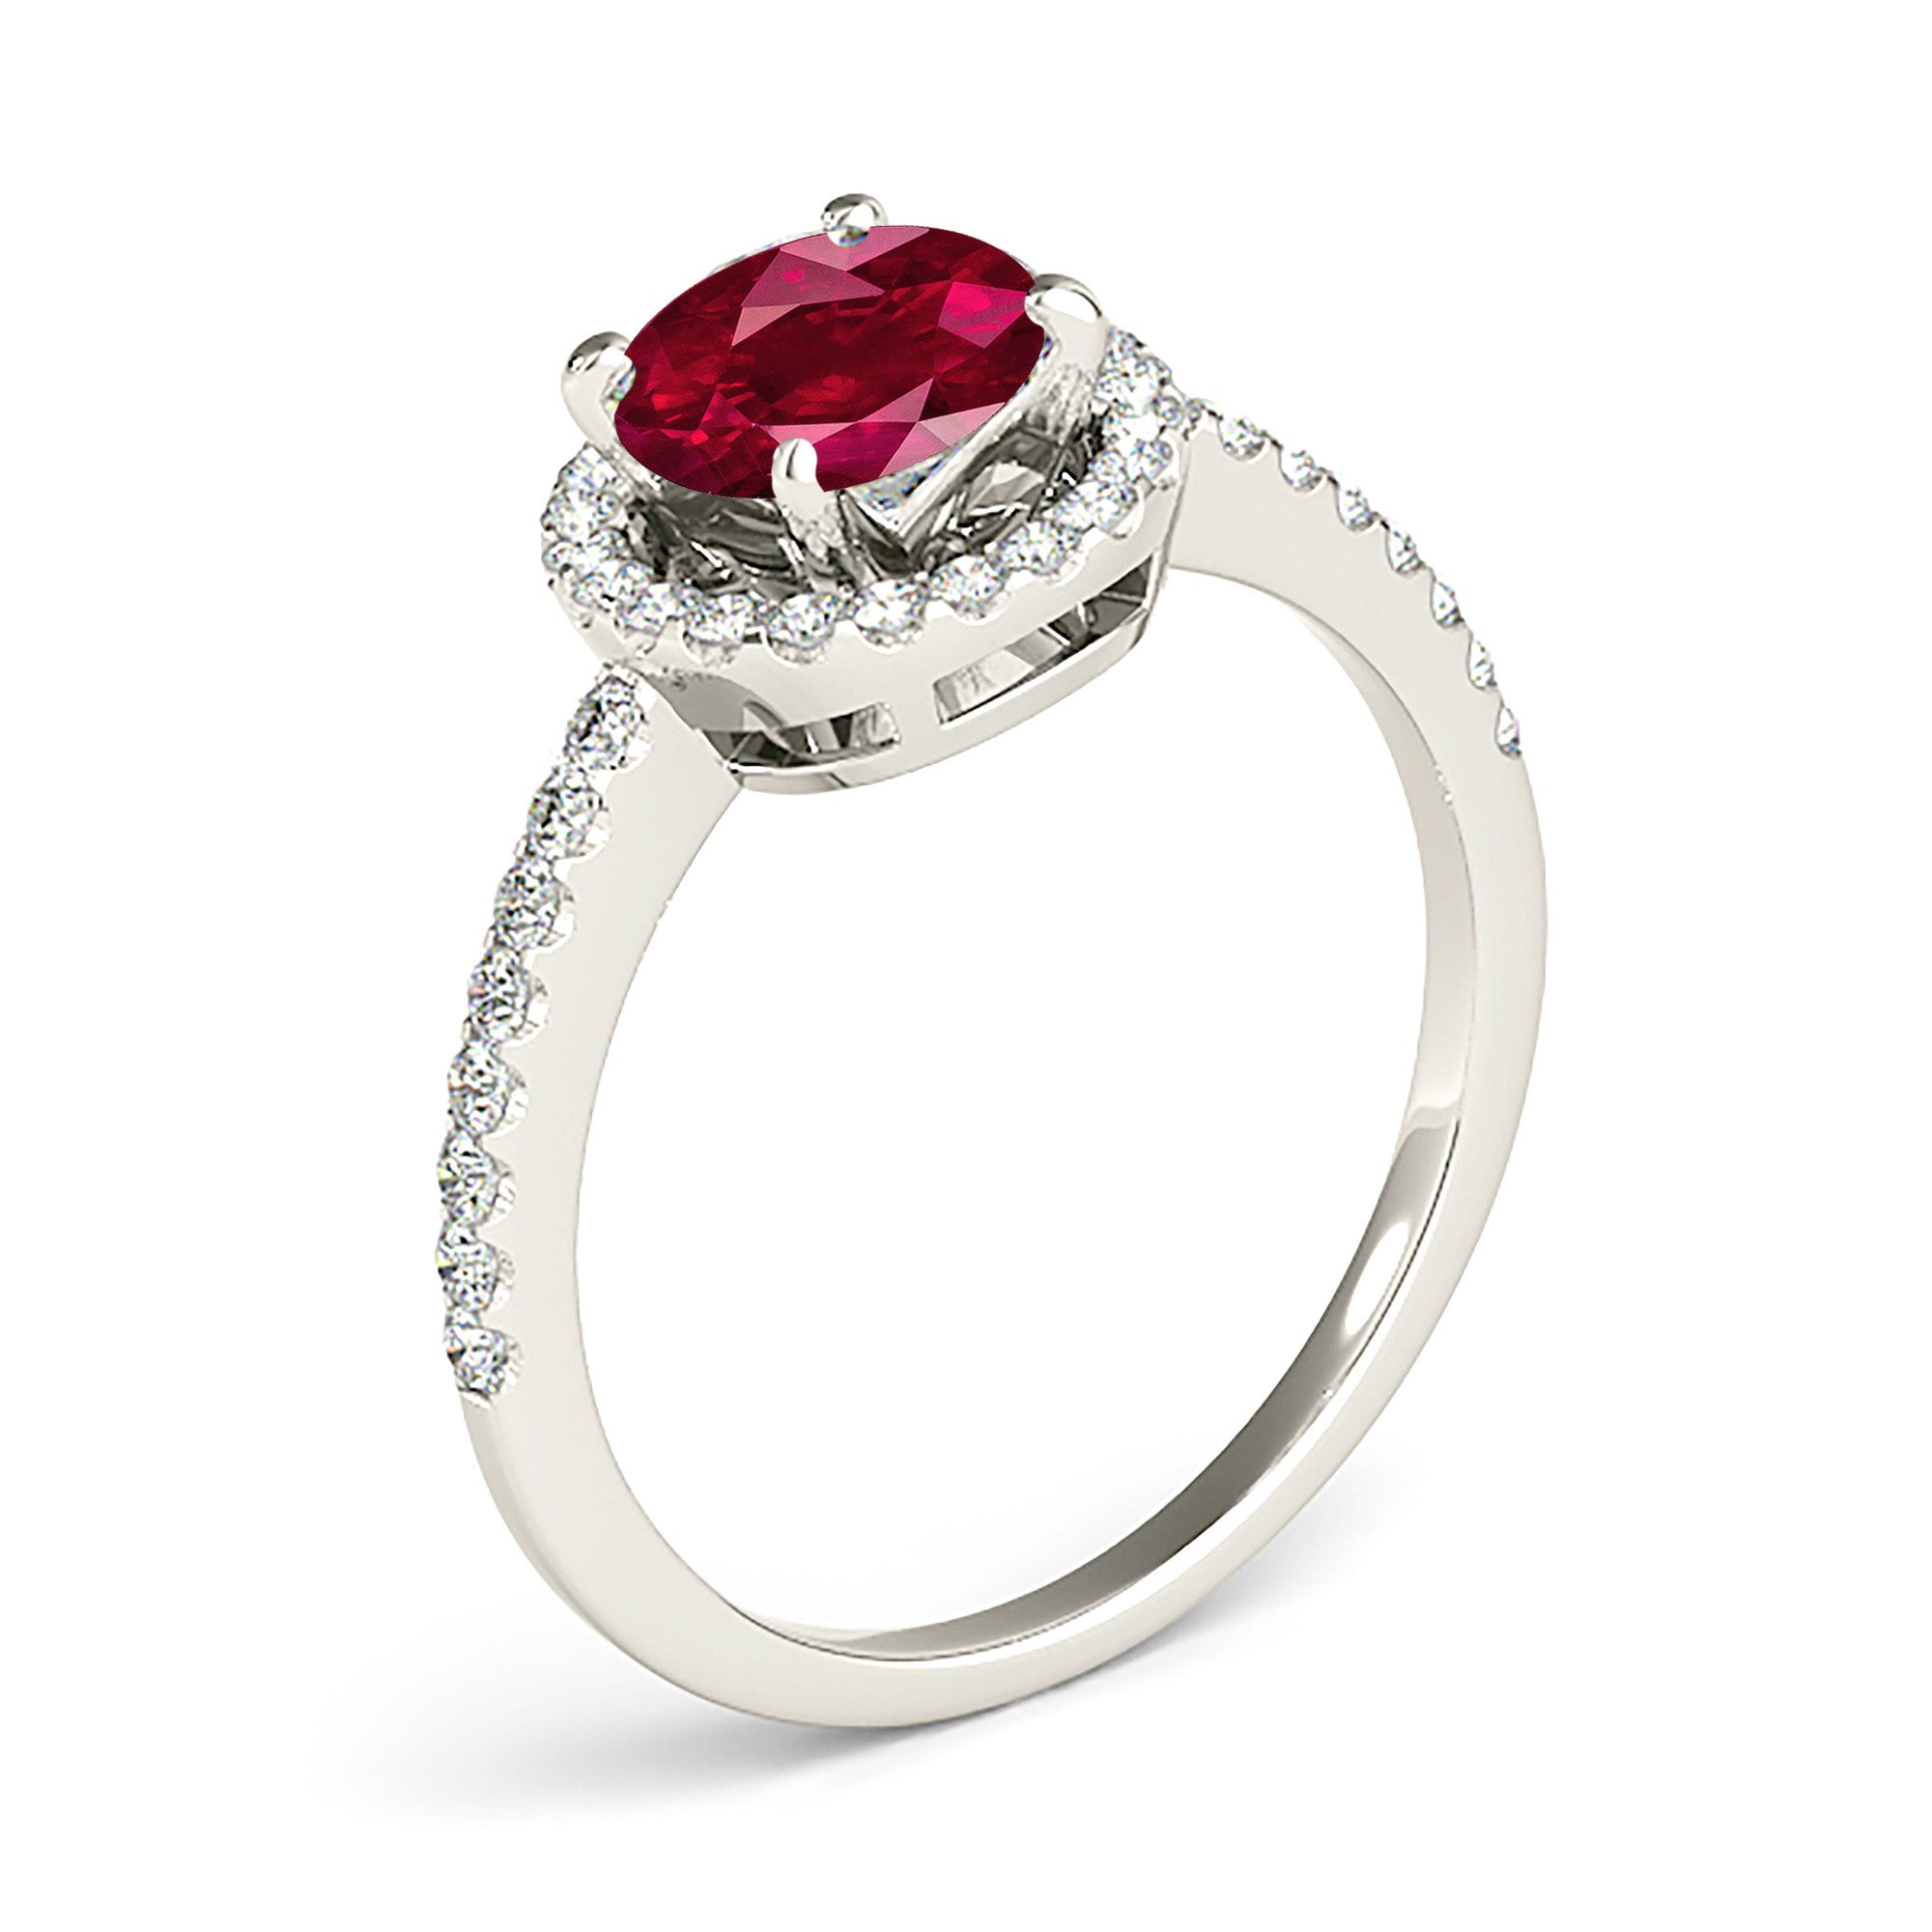 2.35 ct. Genuine Ruby Ring With 0.35 ctw. Diamond Delicate Halo And Thin Band, Elegant Halo Ring-in 14K/18K White, Yellow, Rose Gold and Platinum - Christmas Jewelry Gift -VIRABYANI